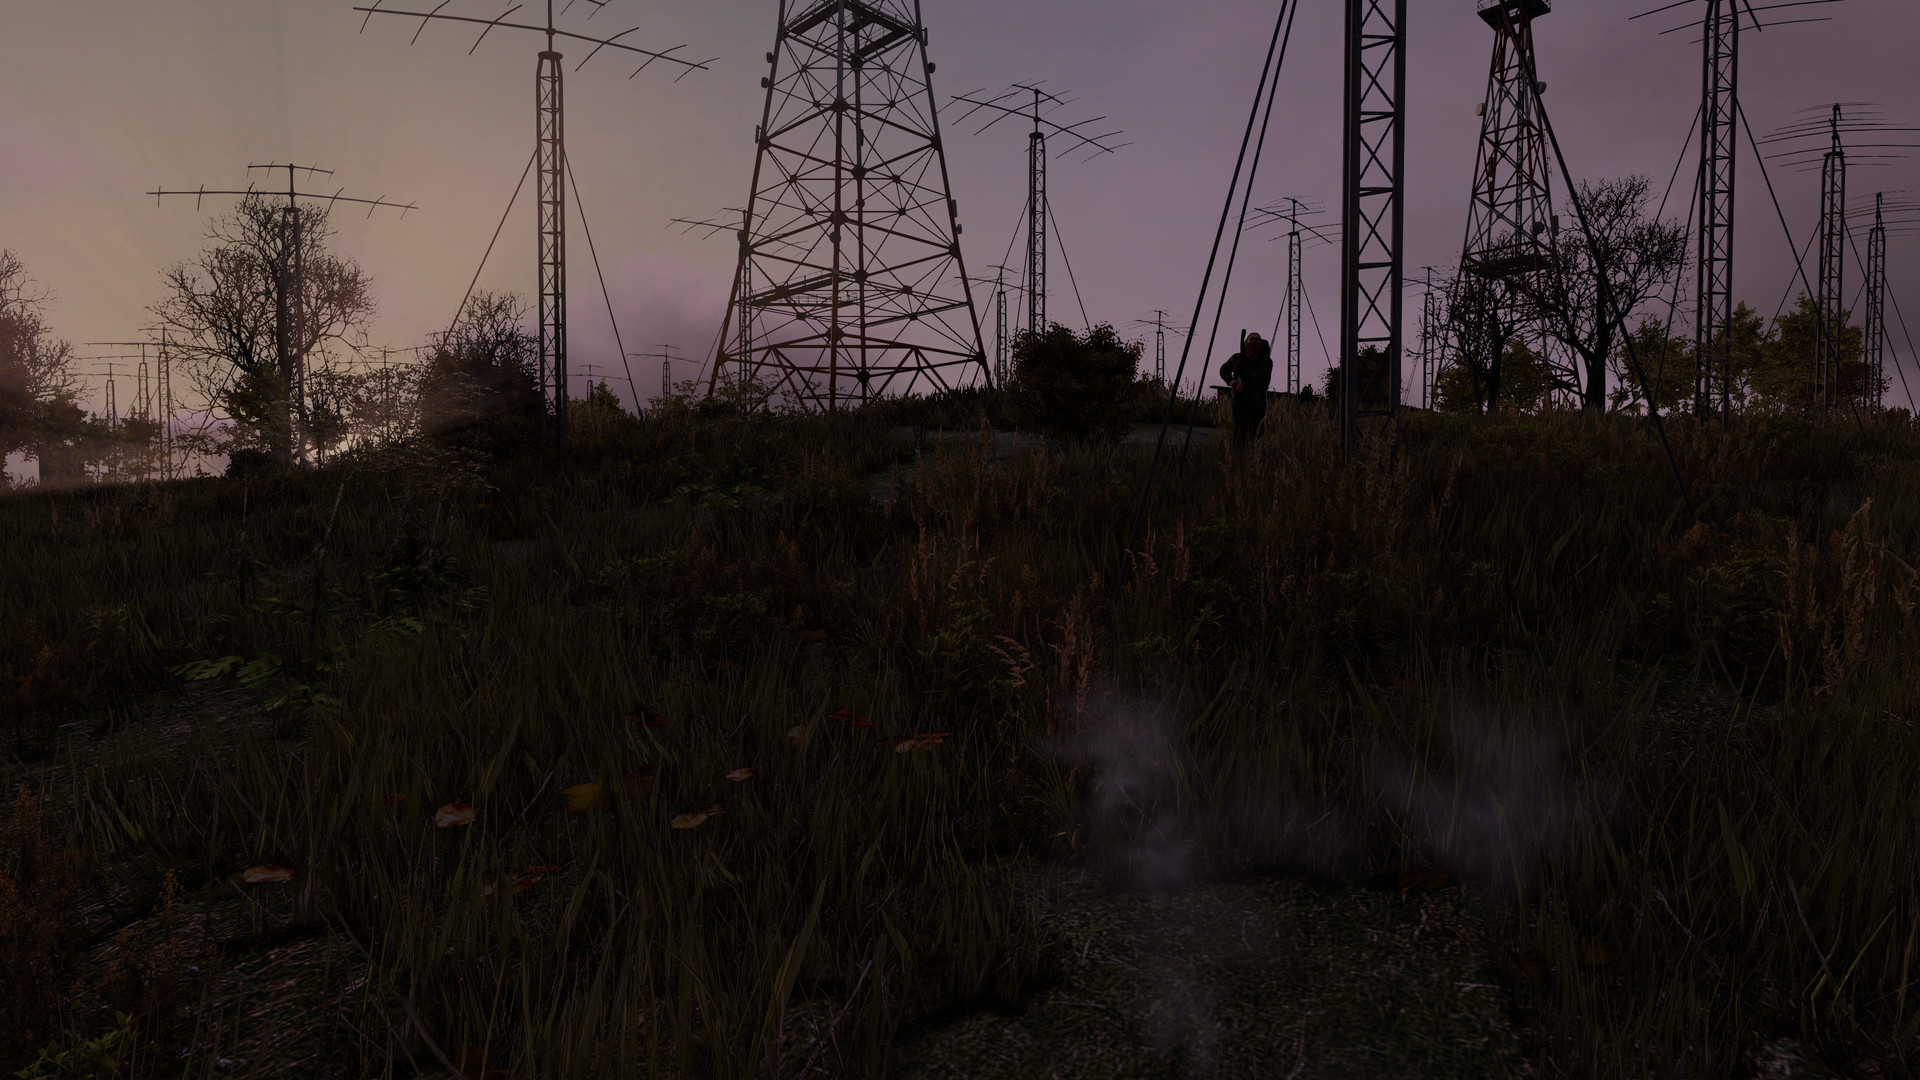 DayZ Images 